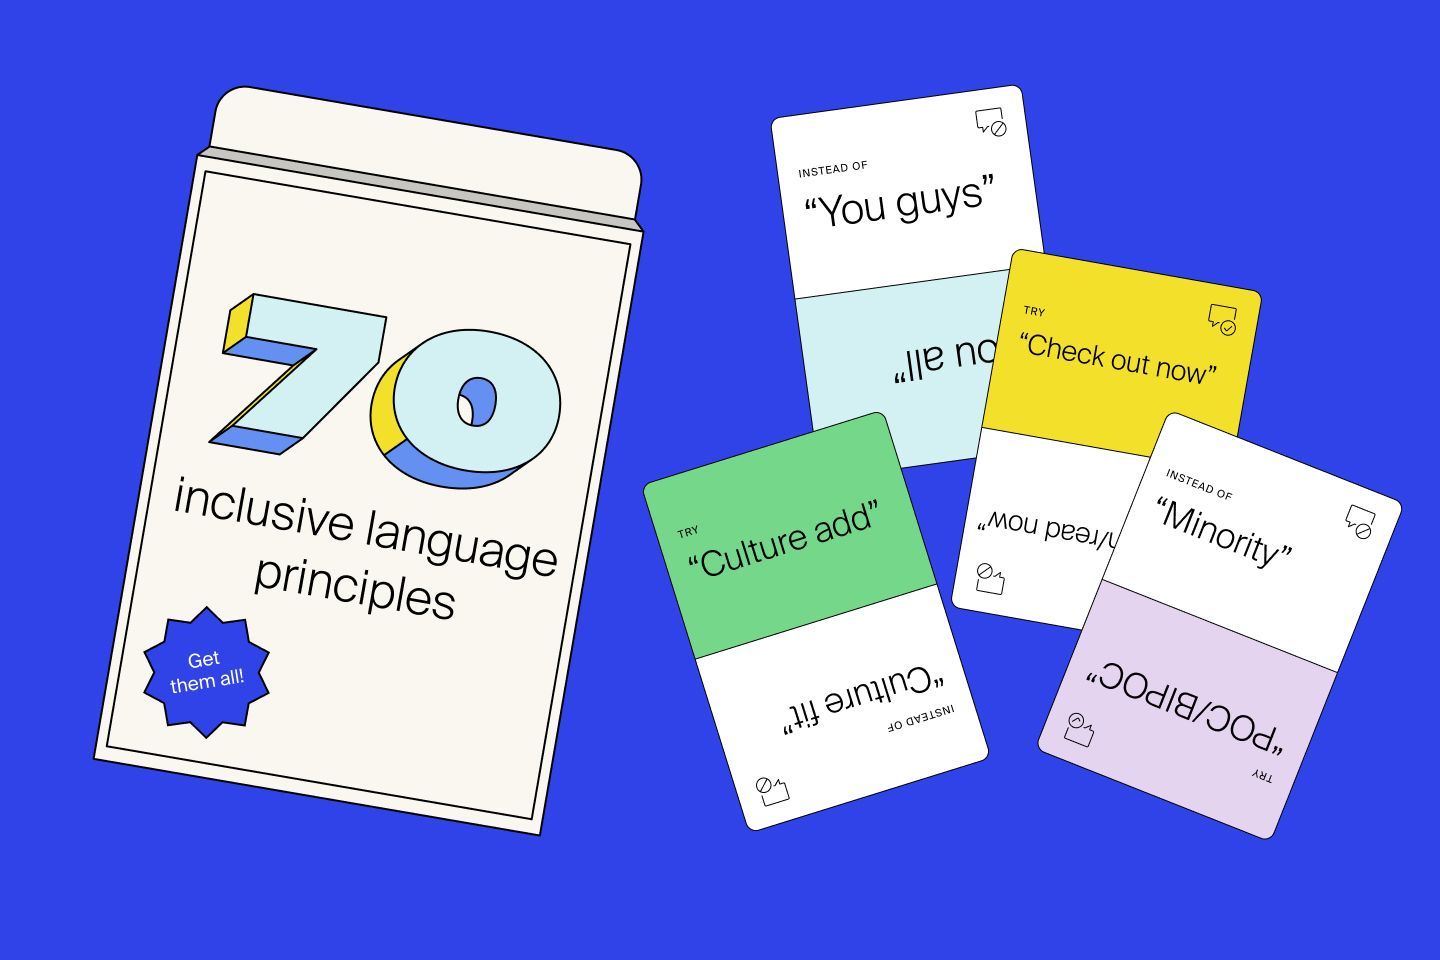 70 Inclusive language principles that will make you a more successful recruiter Handshake photo